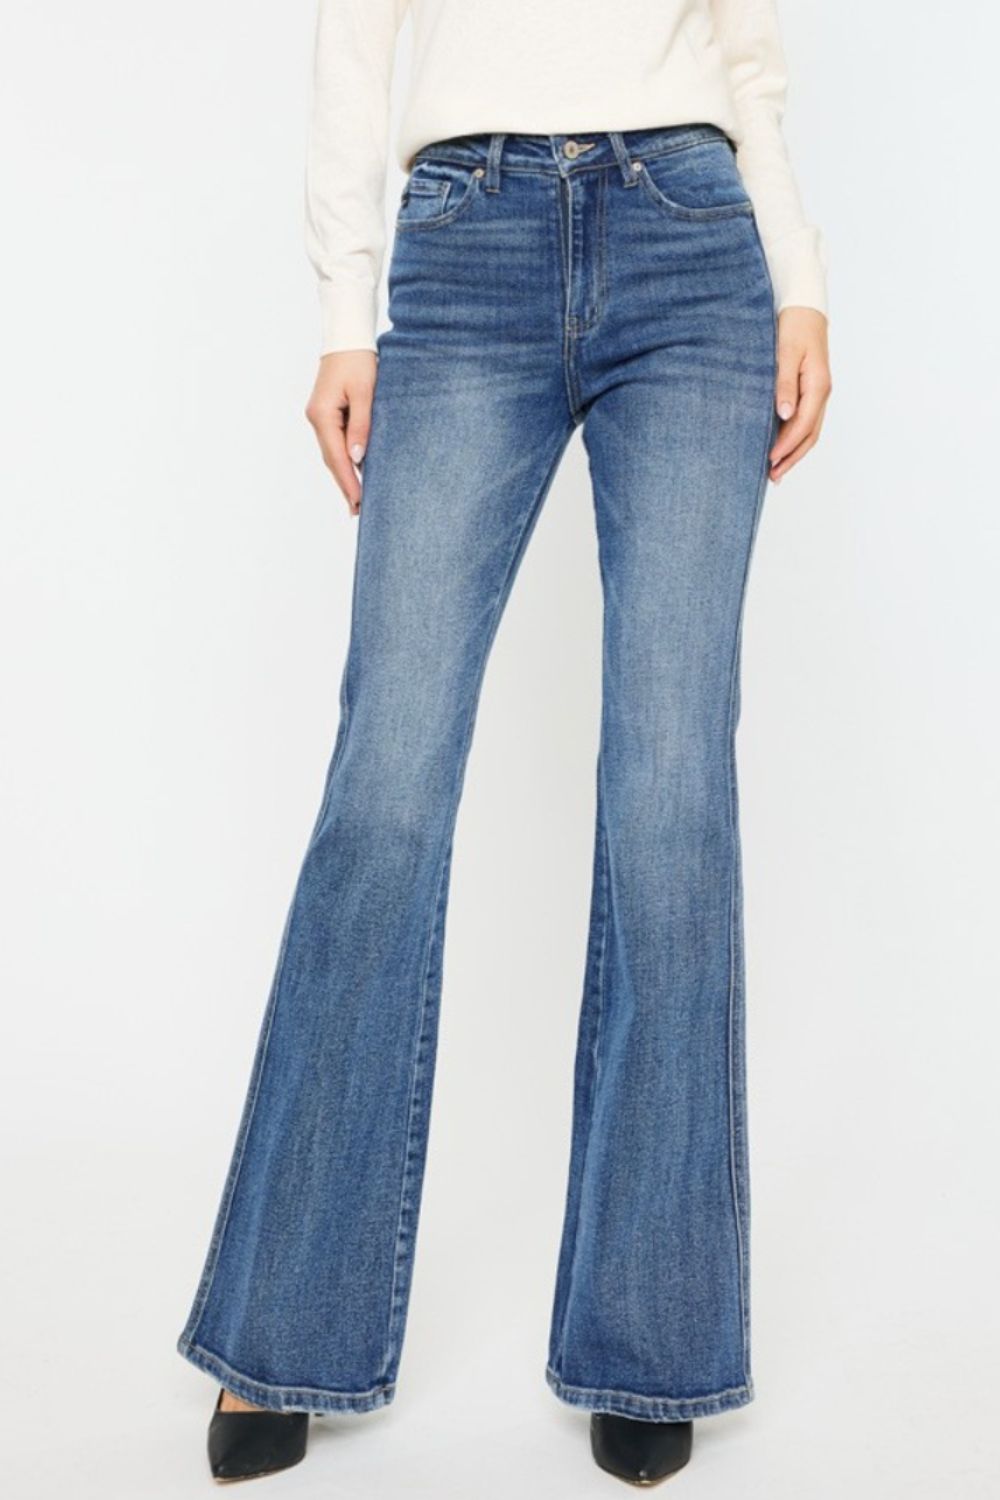 KanCan Flare Jeans - High Rise - Medium Wash - Inspired Eye Boutique